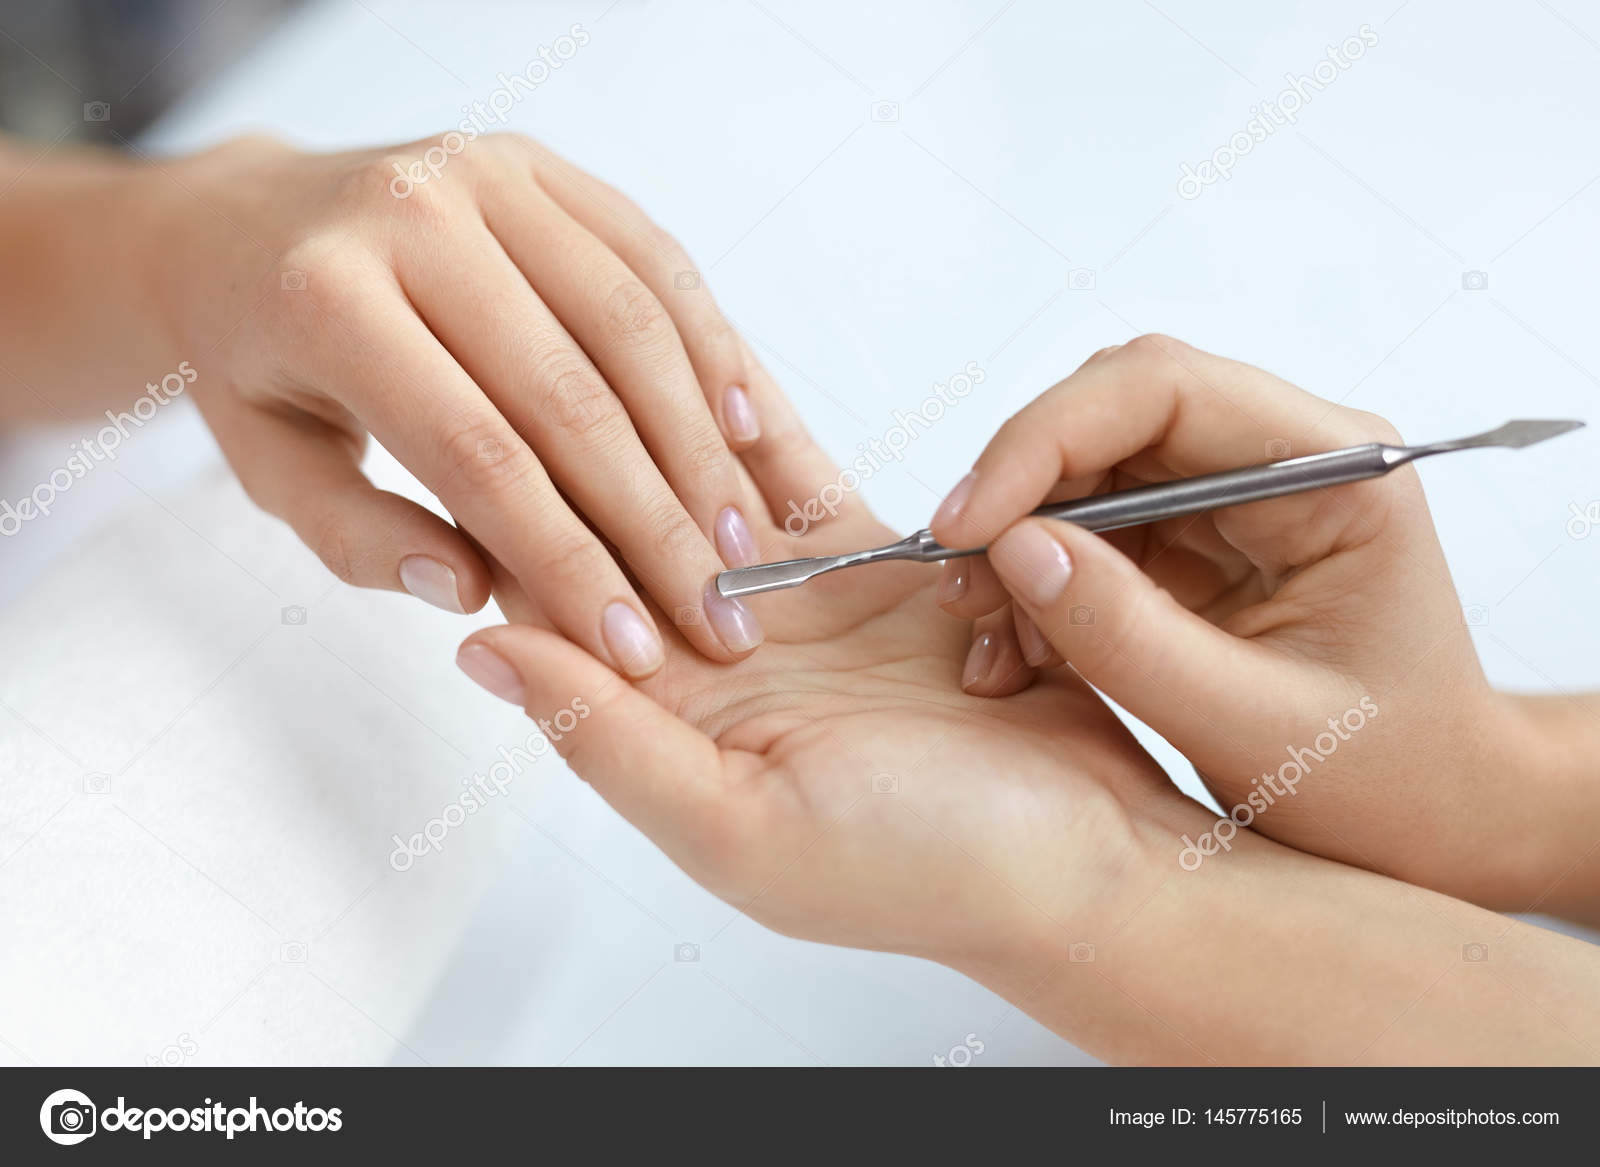 Premium Photo | Nail care procedure on pink background, close up